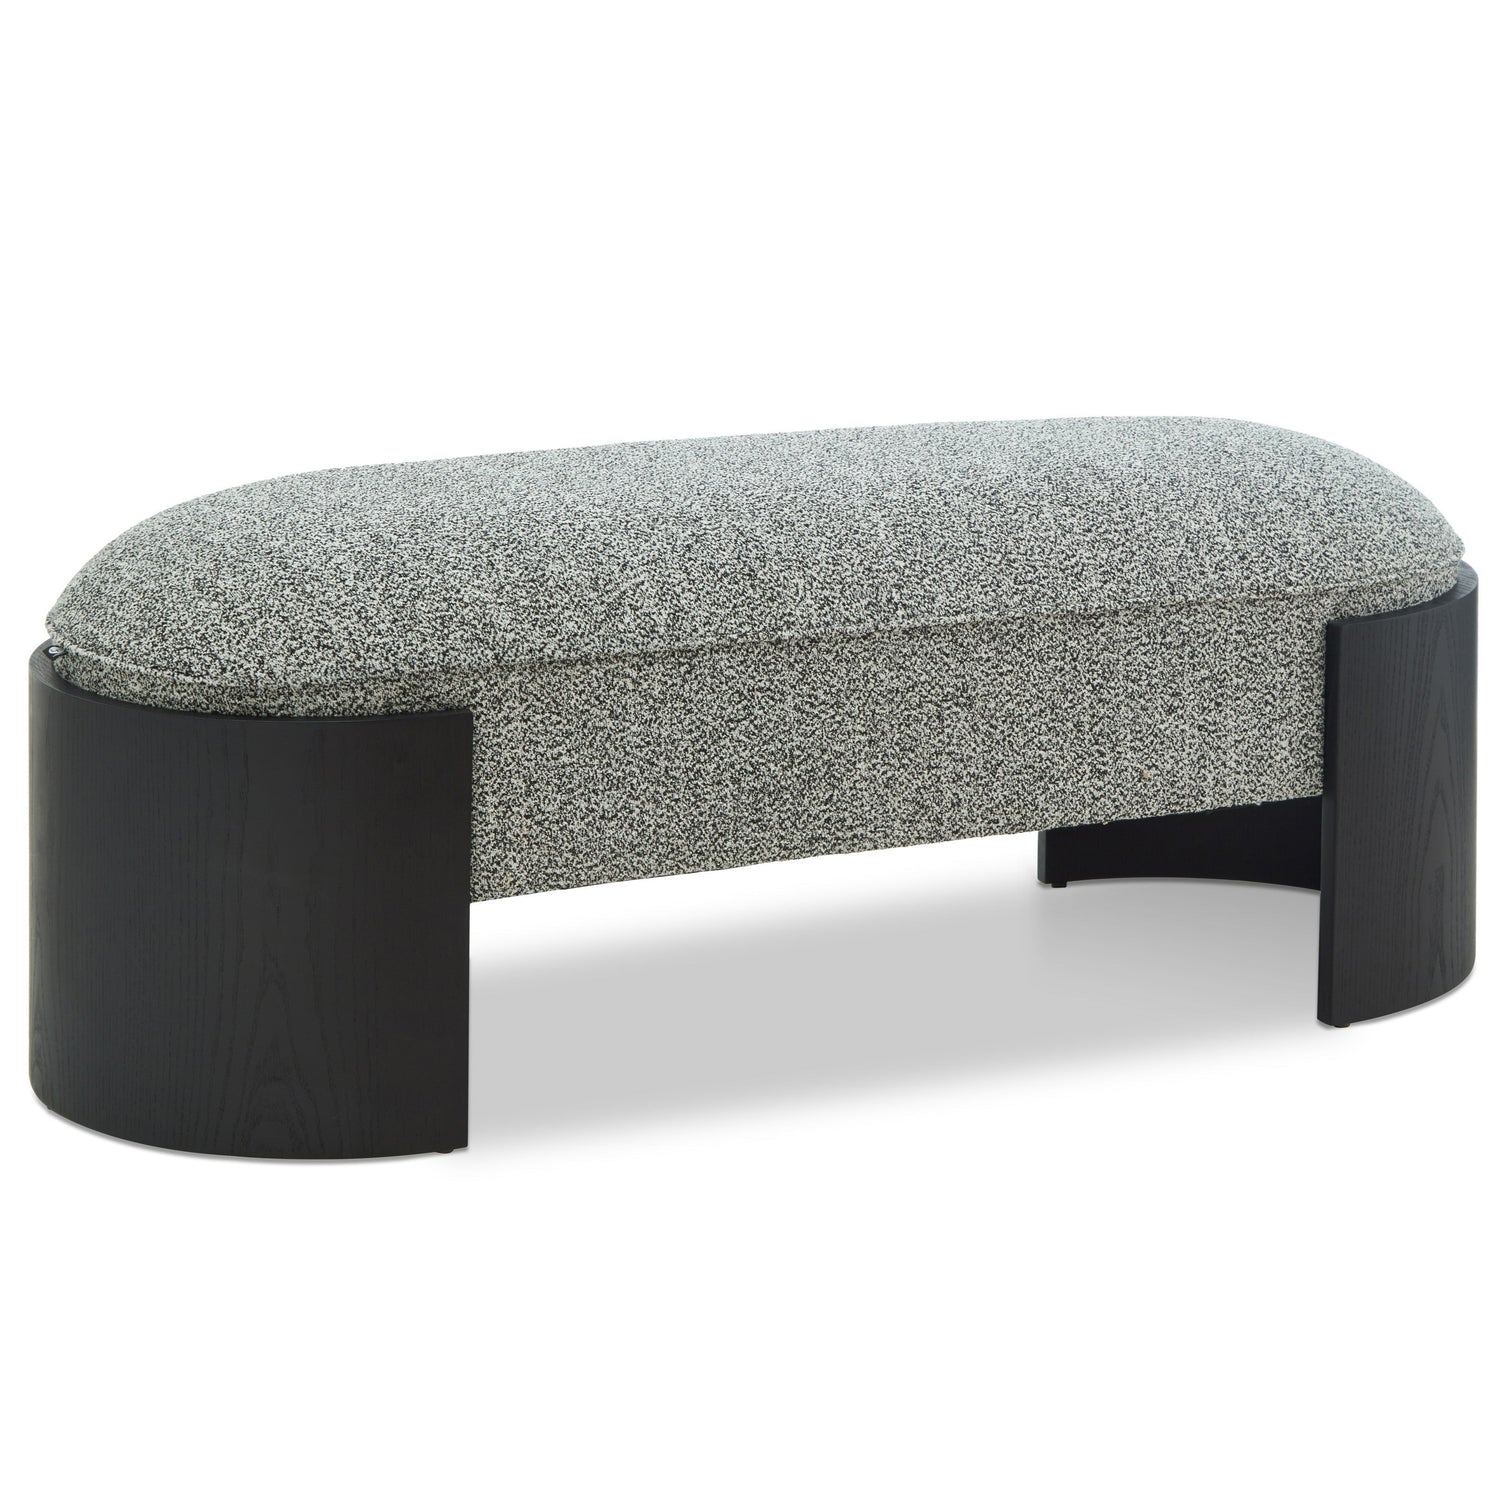  LiangAndEimil-Liang & Eimil Ed Long Bench in Cordoba Speckle Grey-Grey 541 